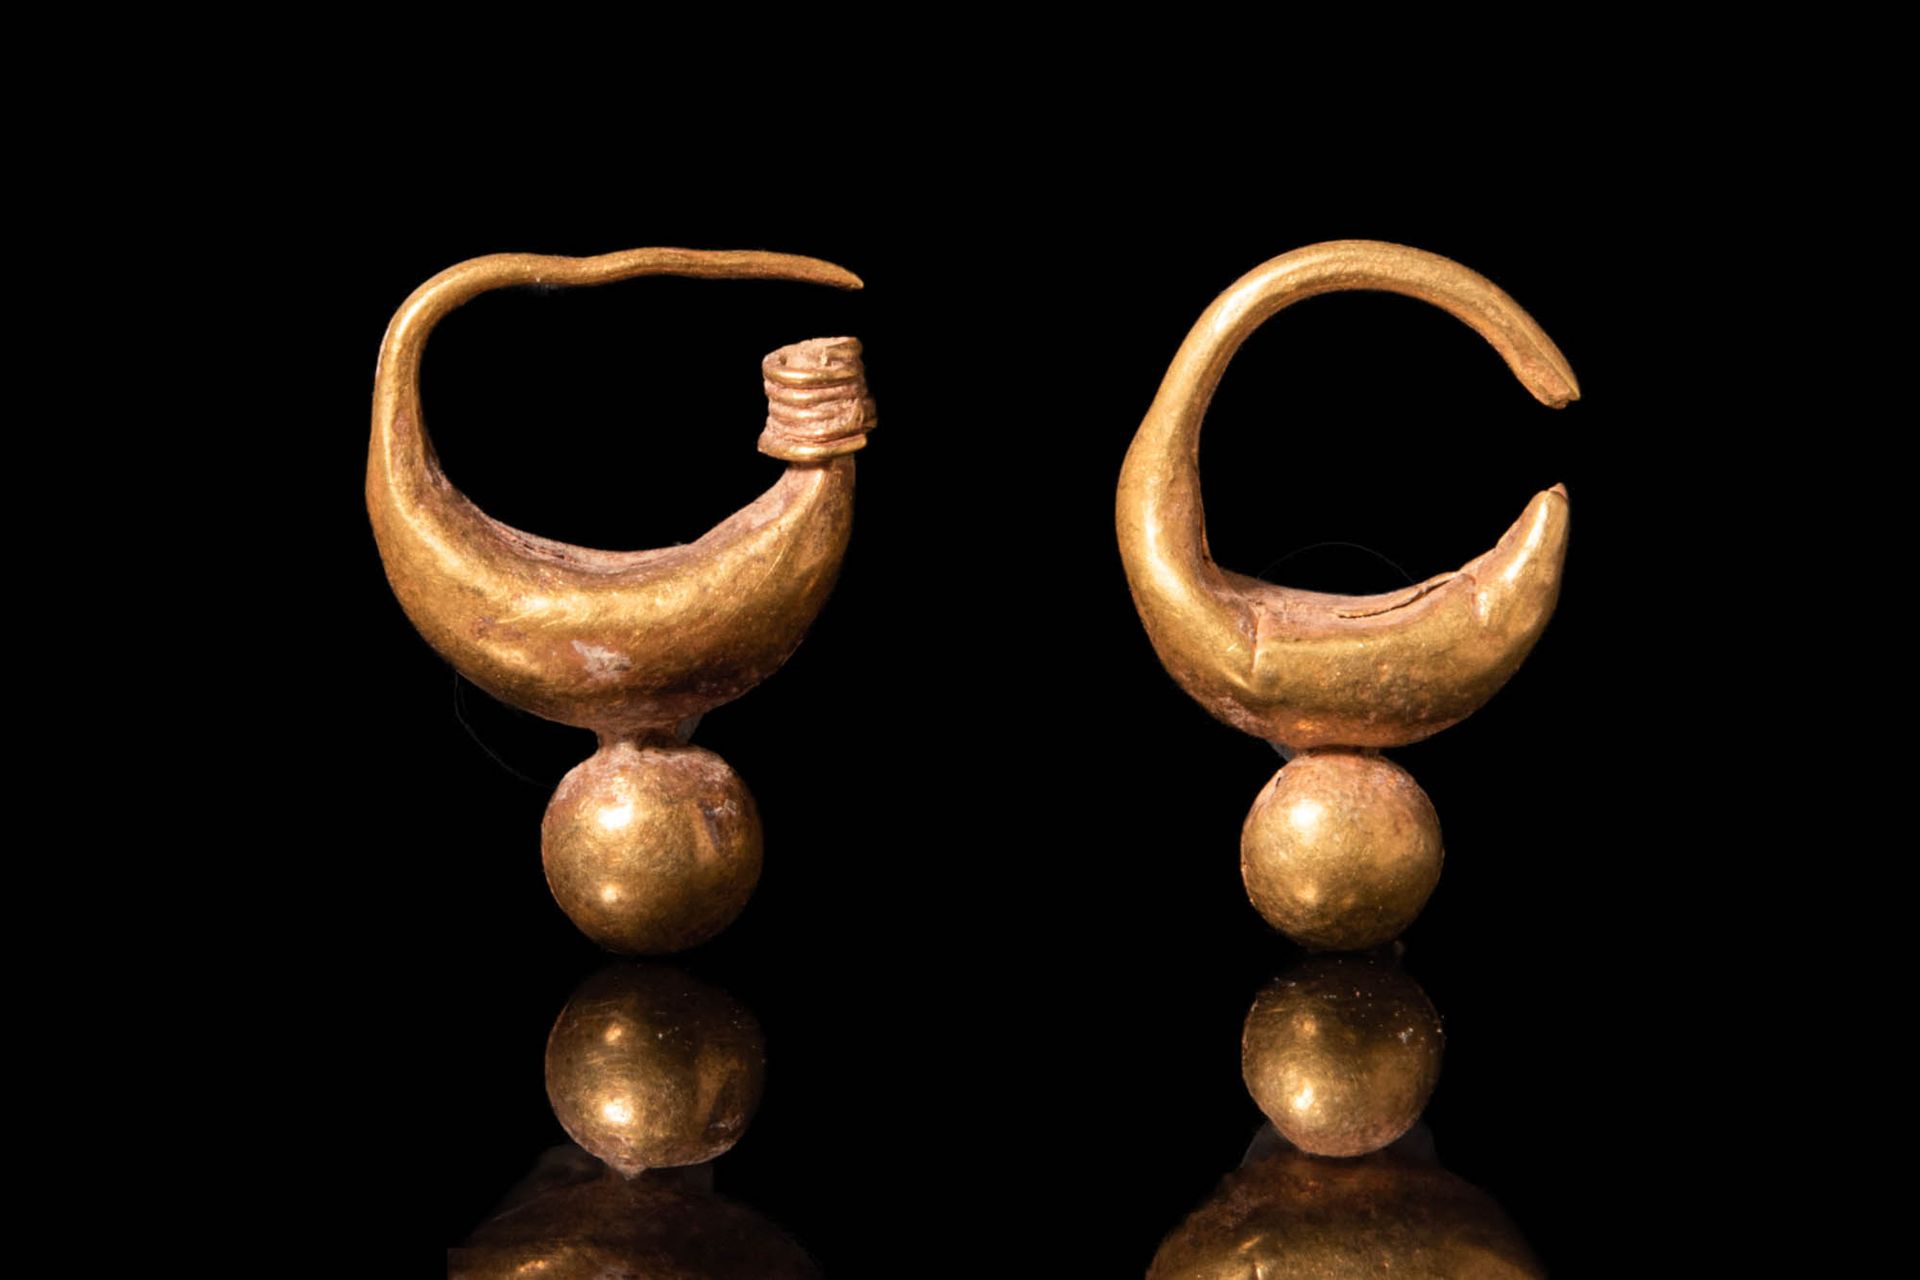 PAIR OF BACTRIAN GOLD EARRINGS Ca. 2000 - 1800 BC.
A pair of Bactrian gold earri&hellip;